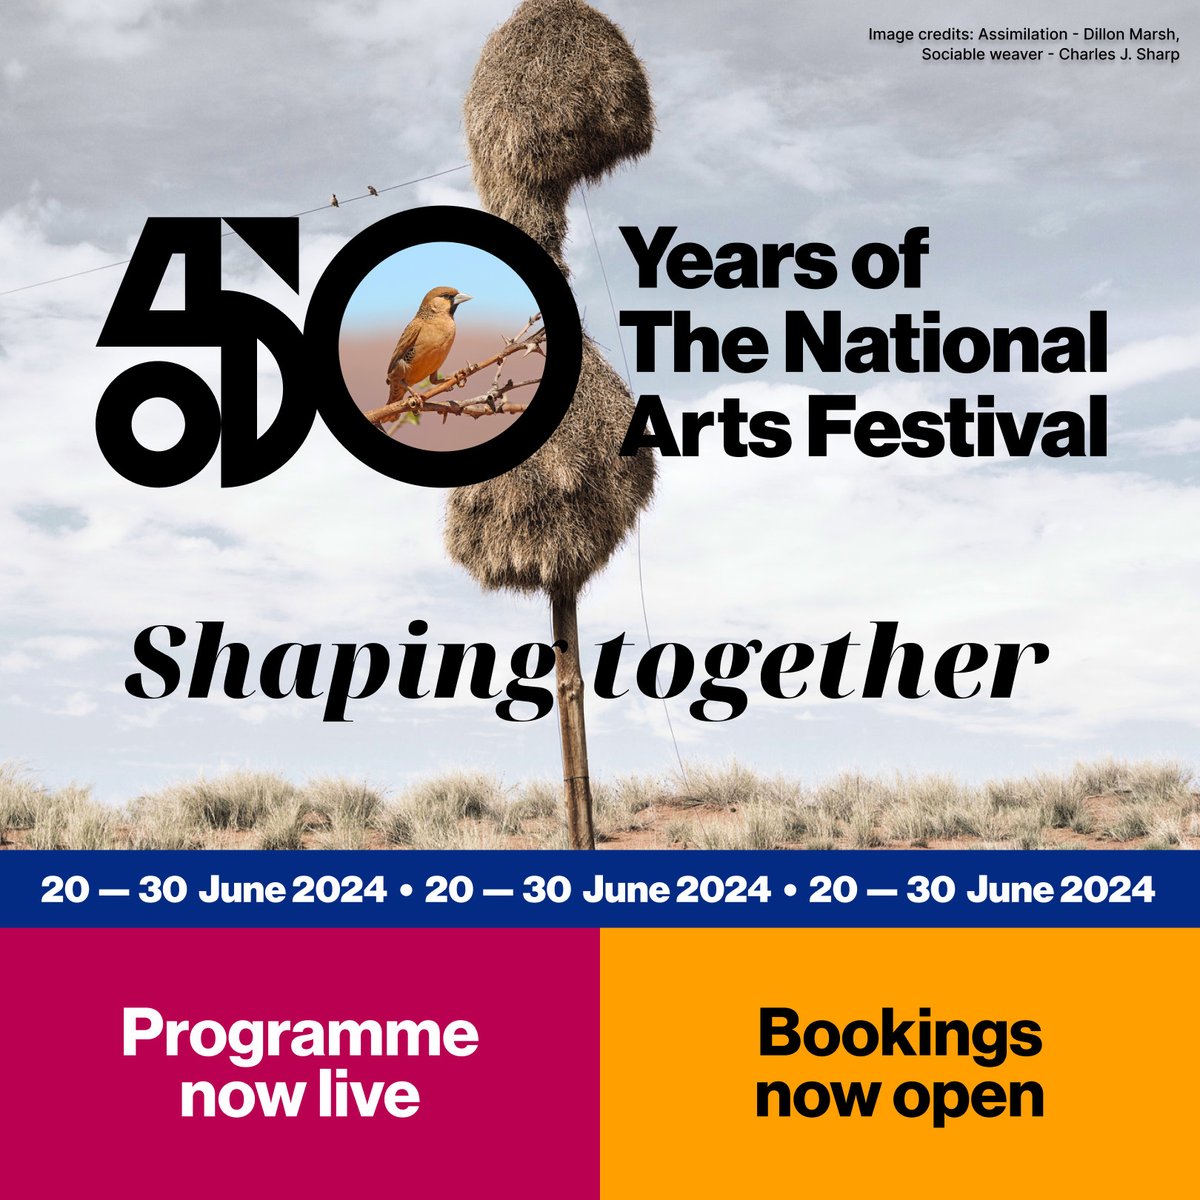 It's getting real! Bookings for the #NationalArtsFestival are now open and can be made online through our ticketing platform. Check out the full programme at bit.ly/3UbdD0A. We cannot wait to see you in Makhanda for the Festival's big 5️⃣0️⃣! #NAF50 #BookNow